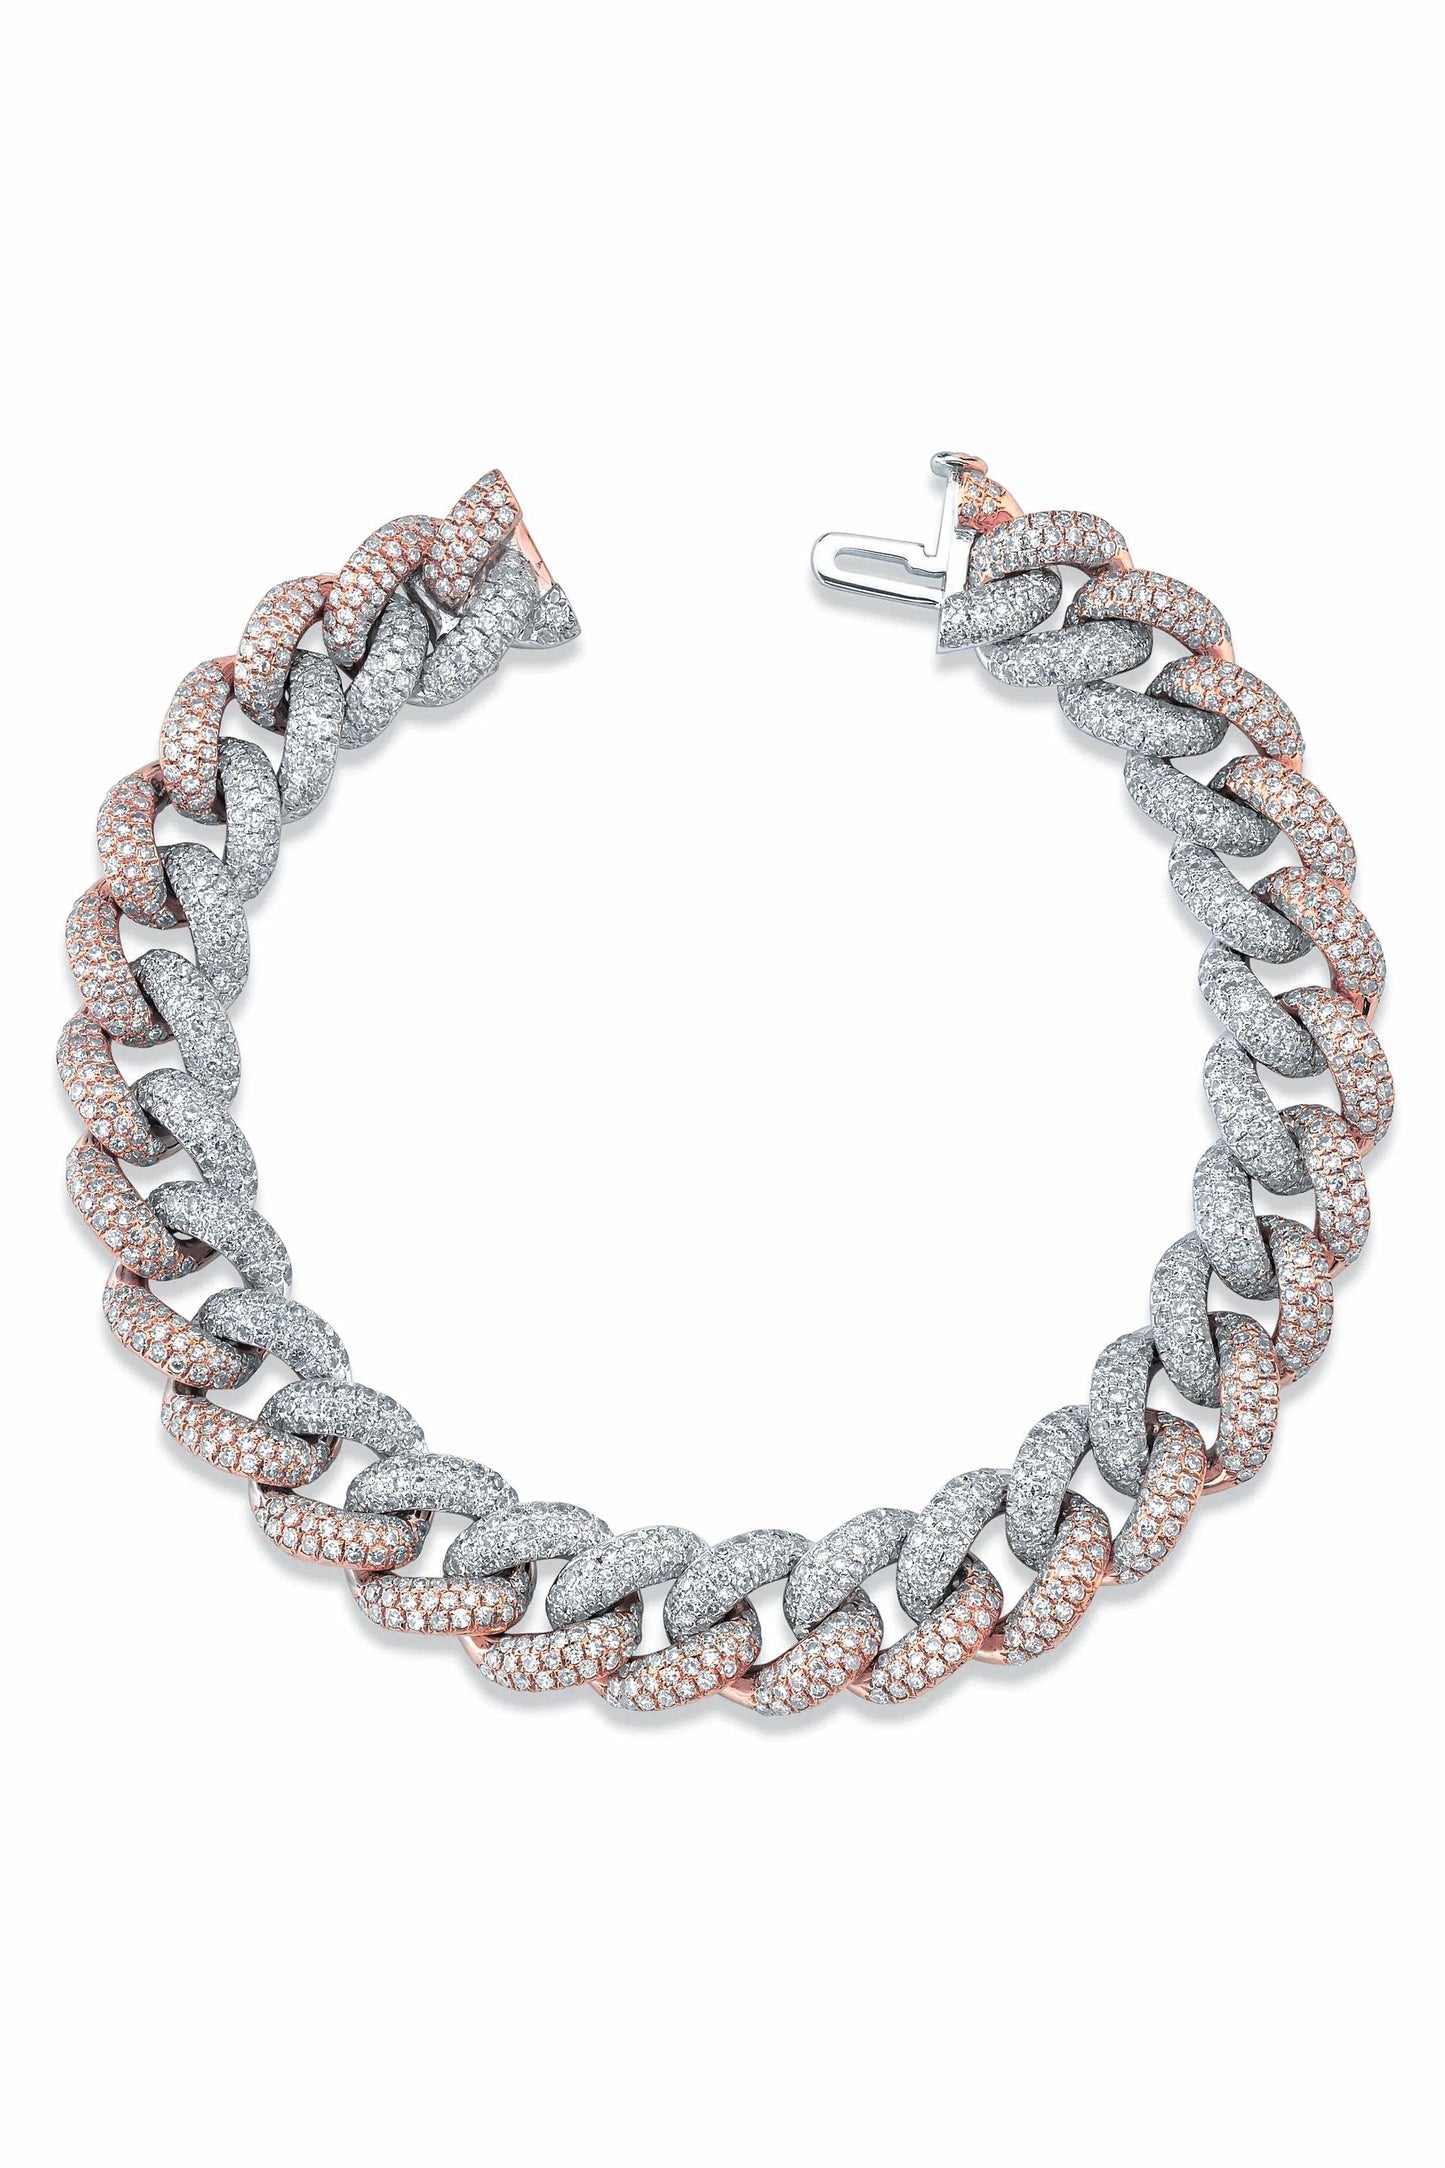 SHAY JEWELRY-Diamond Pave Two-Tone Essential Link Bracelet-WHITE GOLD